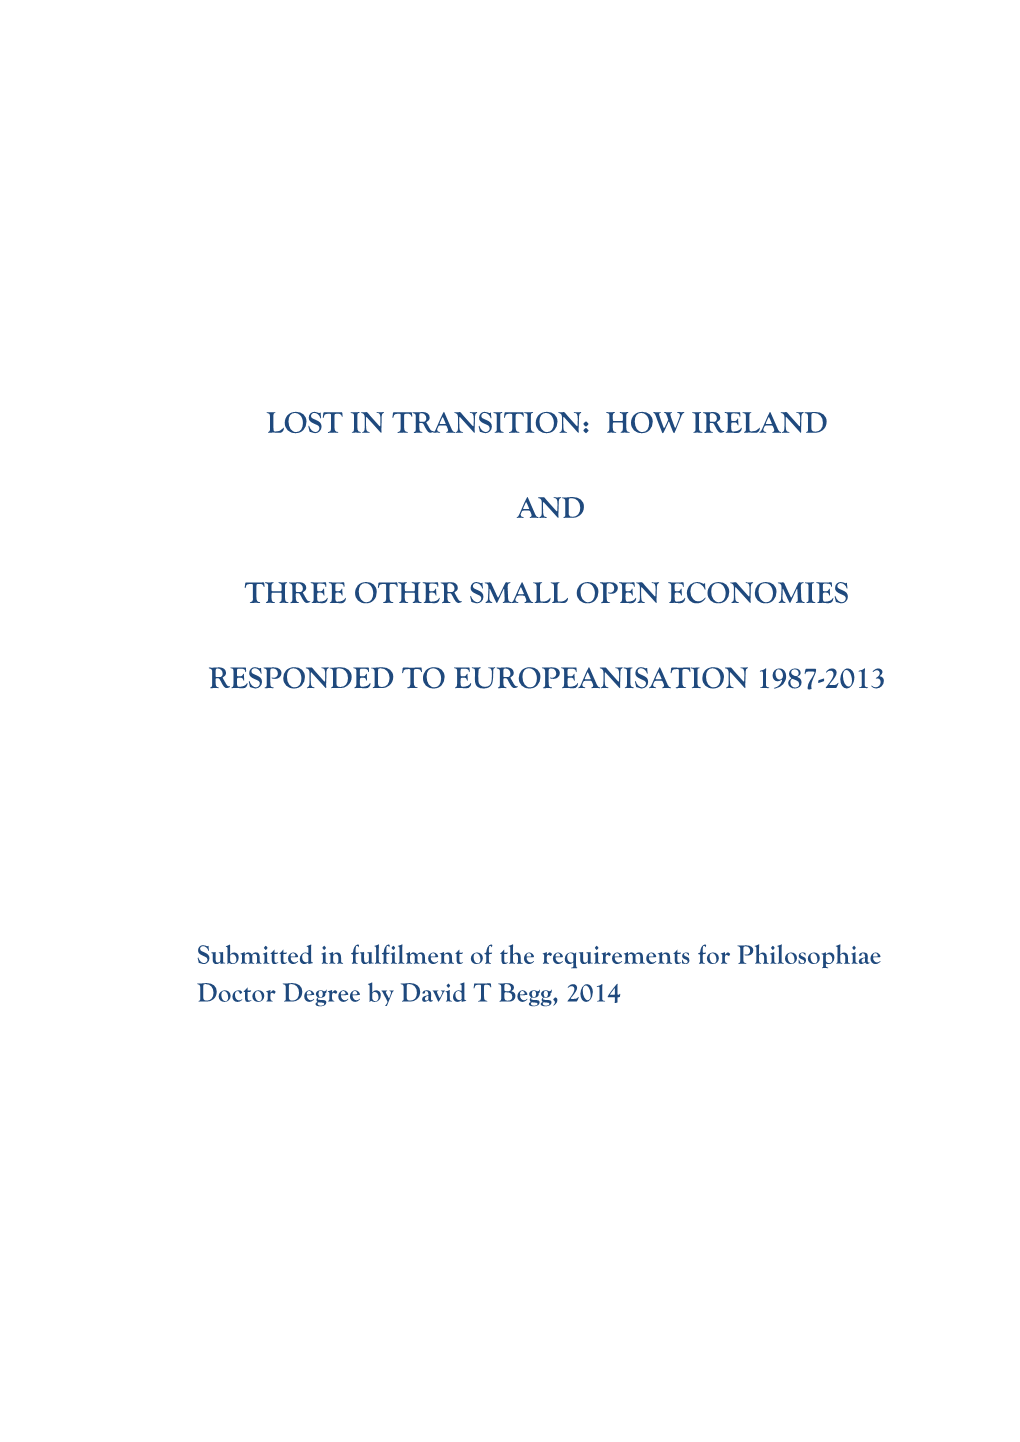 Lost in Transition: How Ireland and Three Other Small Open